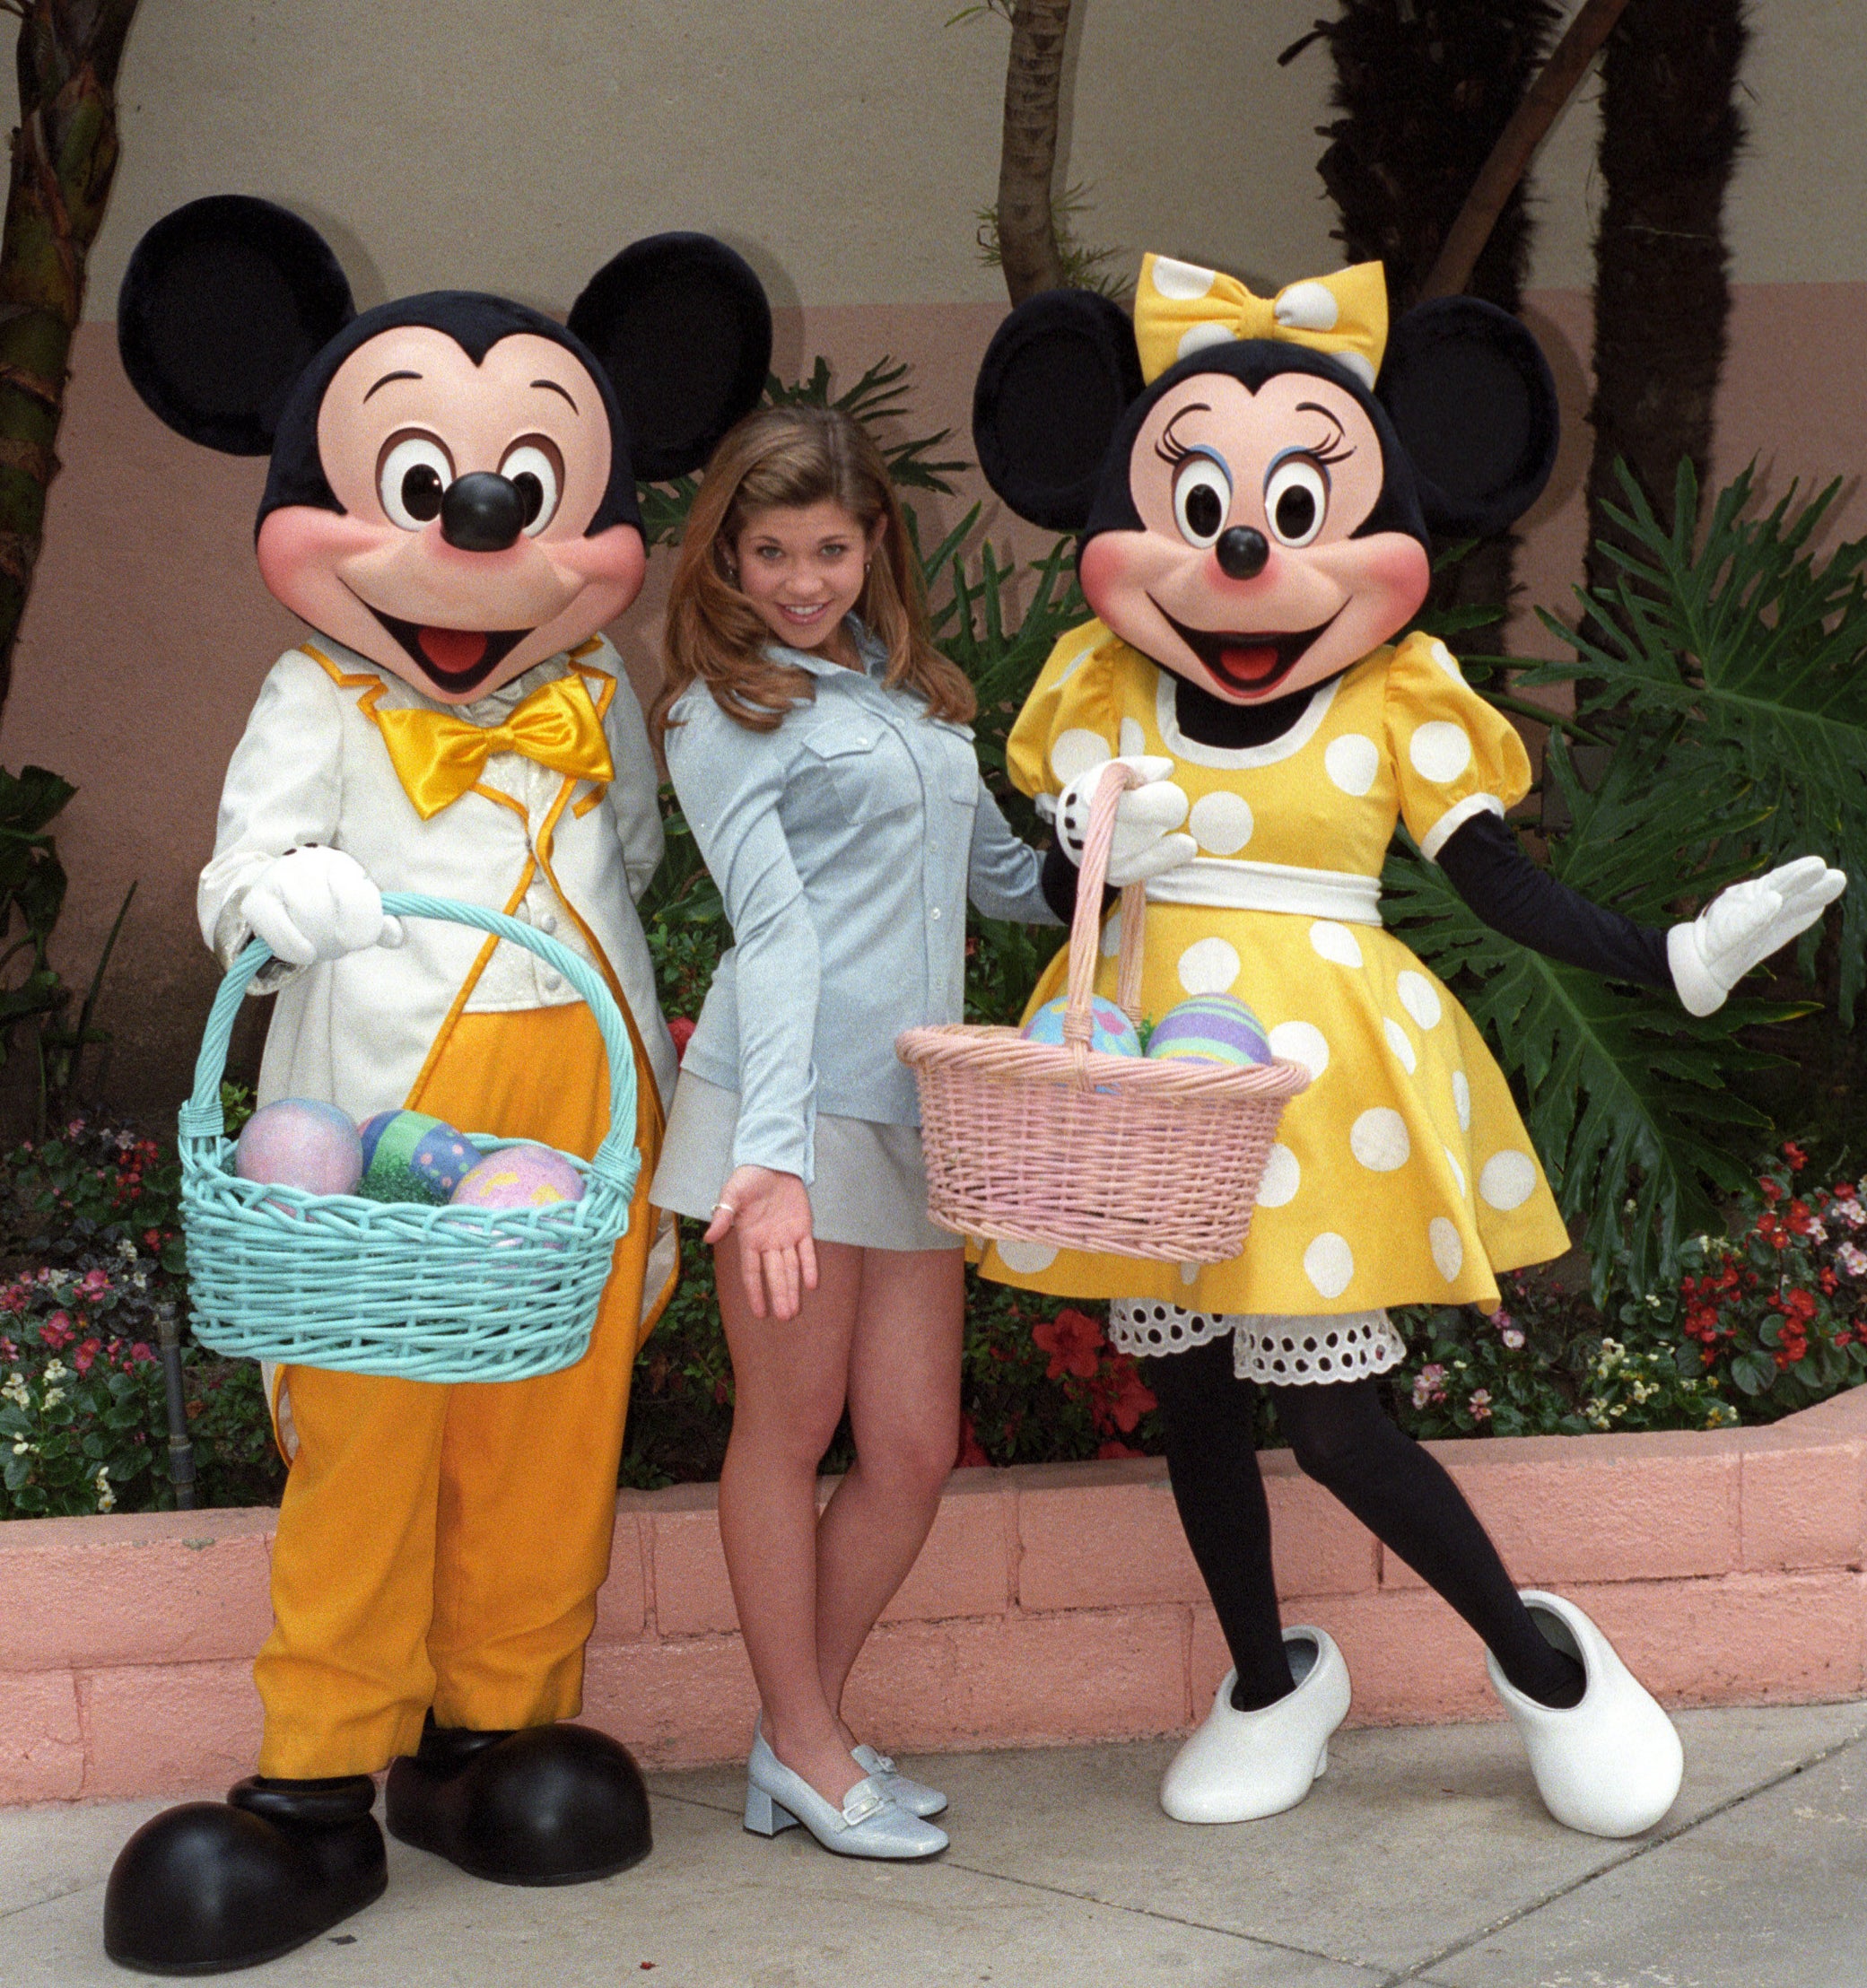 Danielle posing with actors as Mickey and Minnie Mouse